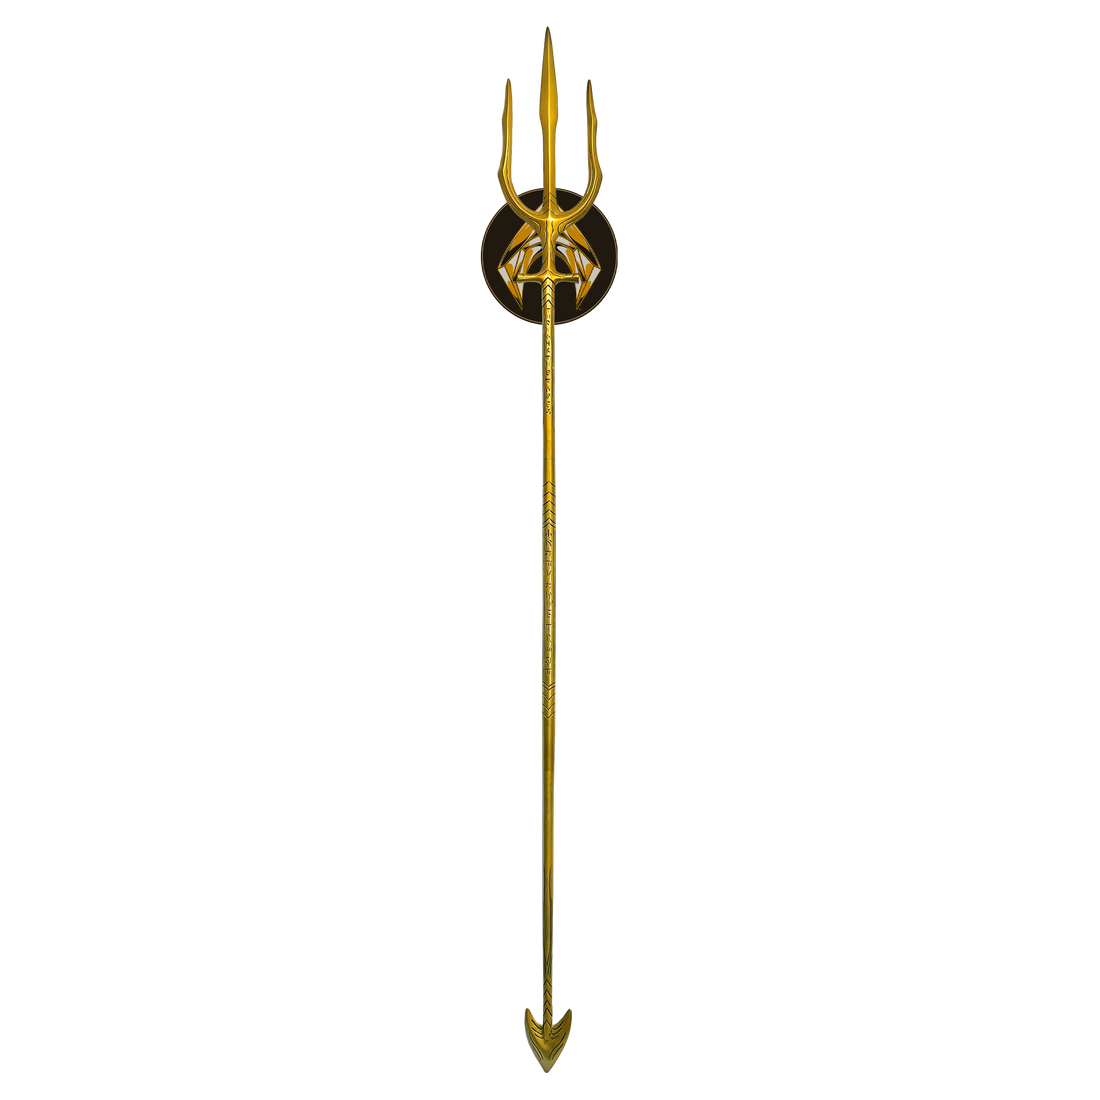 Aquaman And The Lost Kingdom | Trident Limited Edition Prop Replica